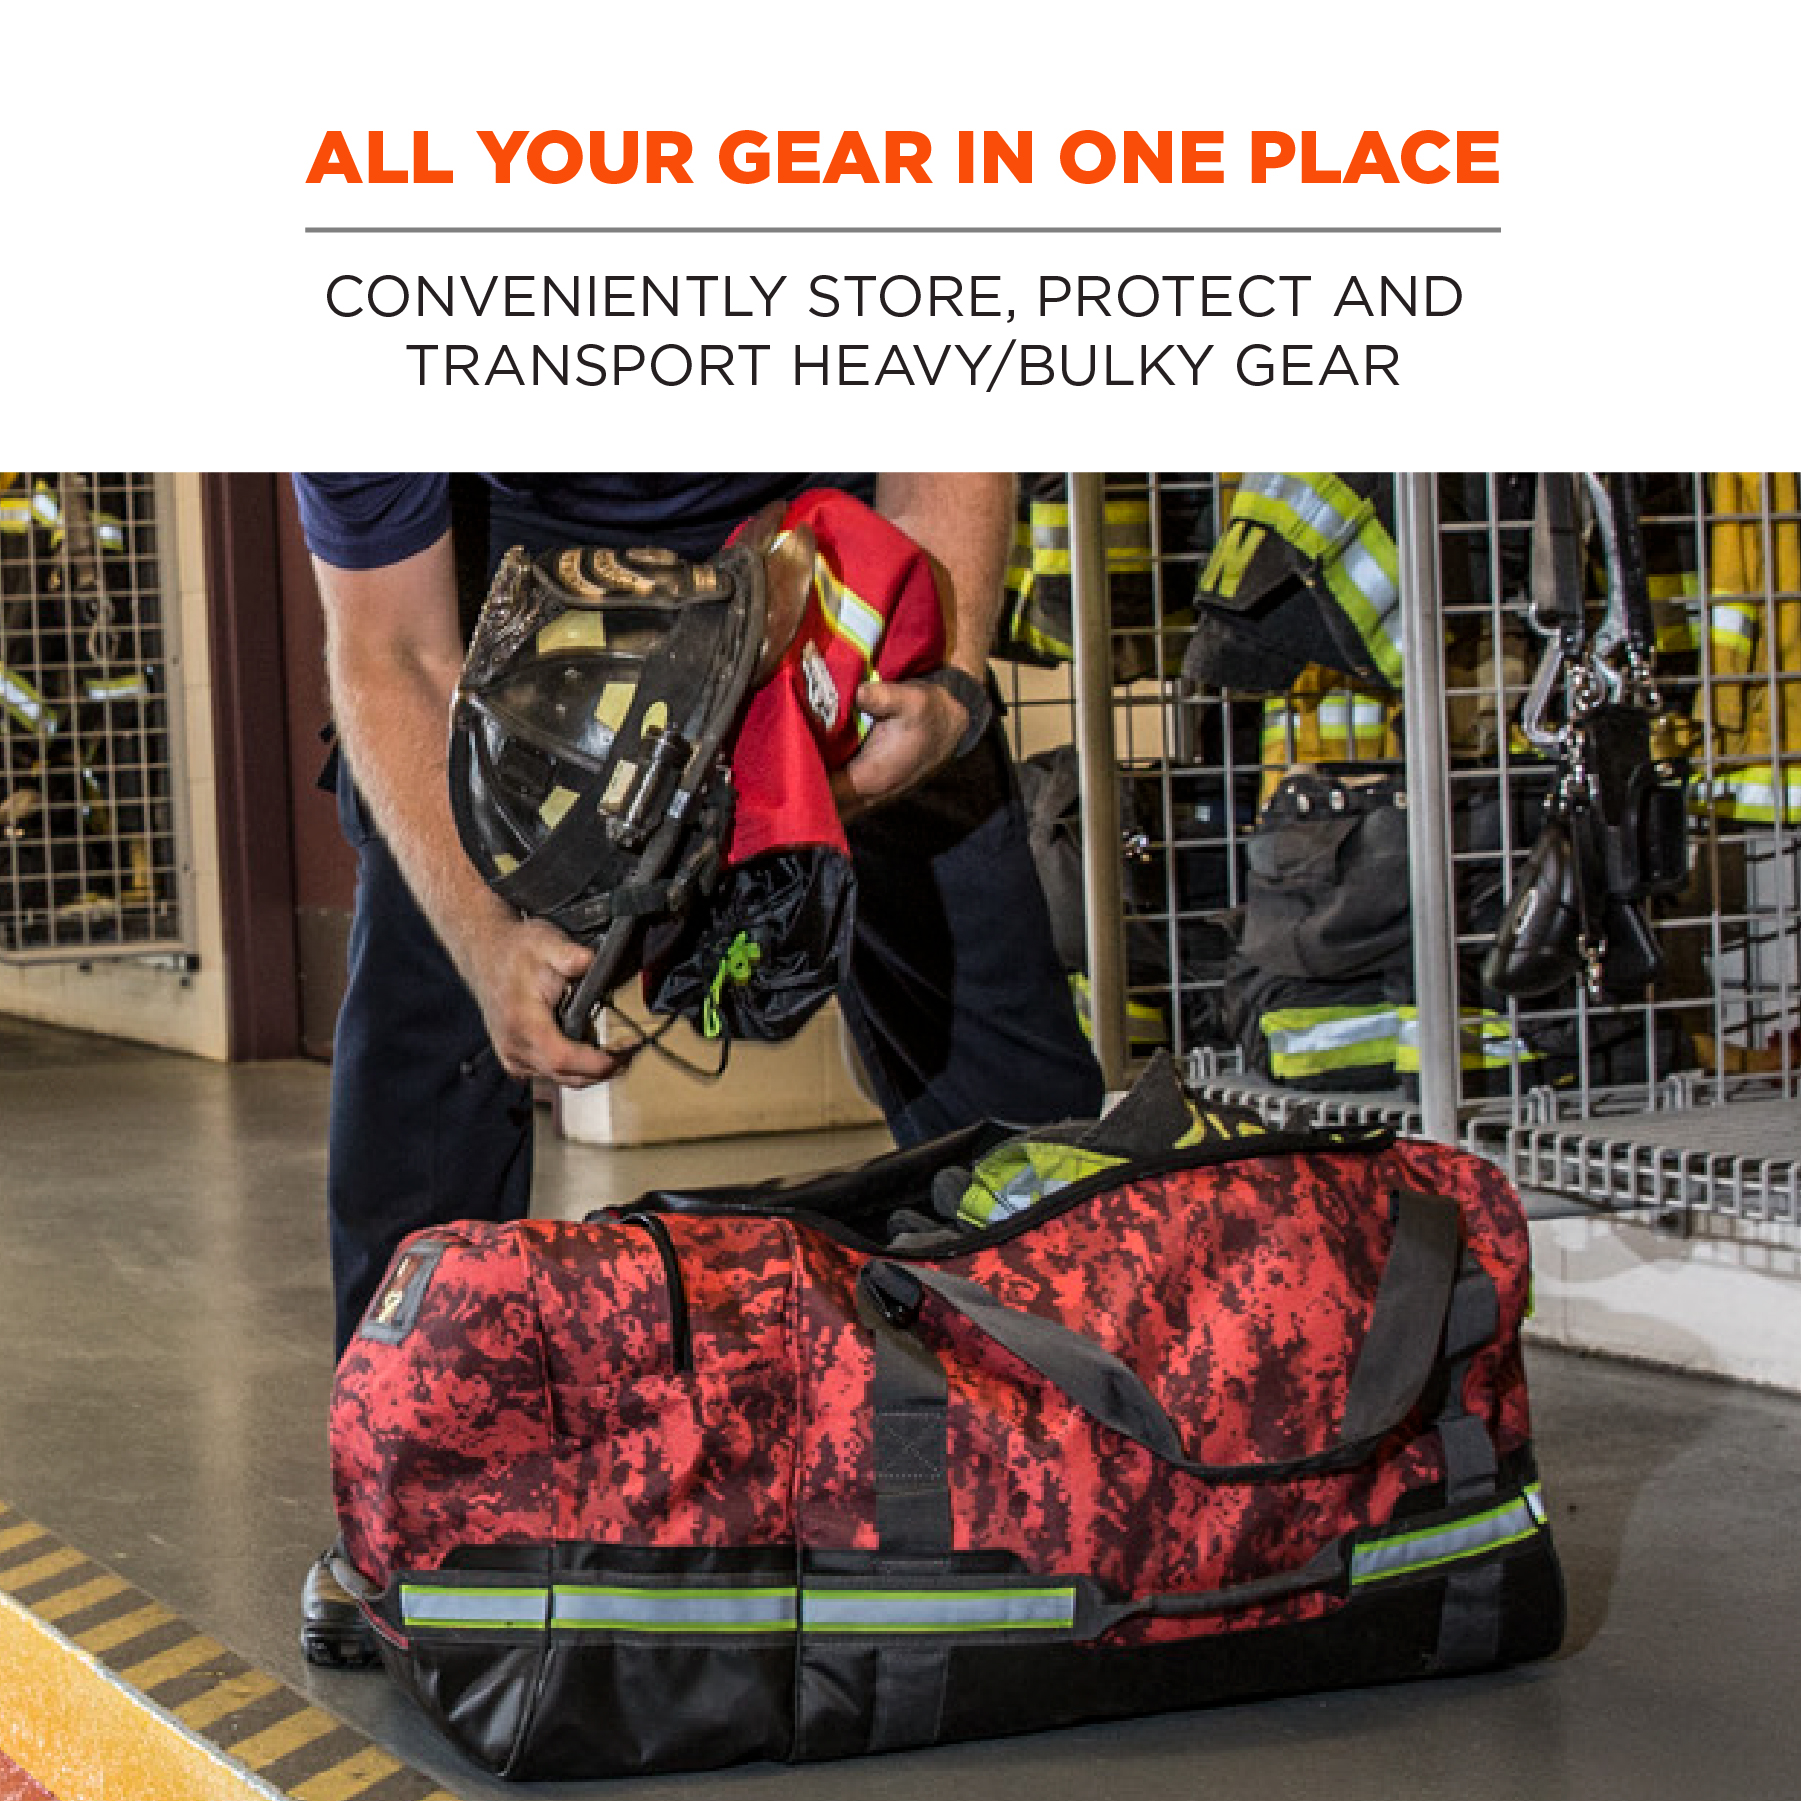 https://www.ergodyne.com/sites/default/files/product-images/13008-5008-firefighter-turnout-bag-red-all-your-gear-in-one-place.jpg